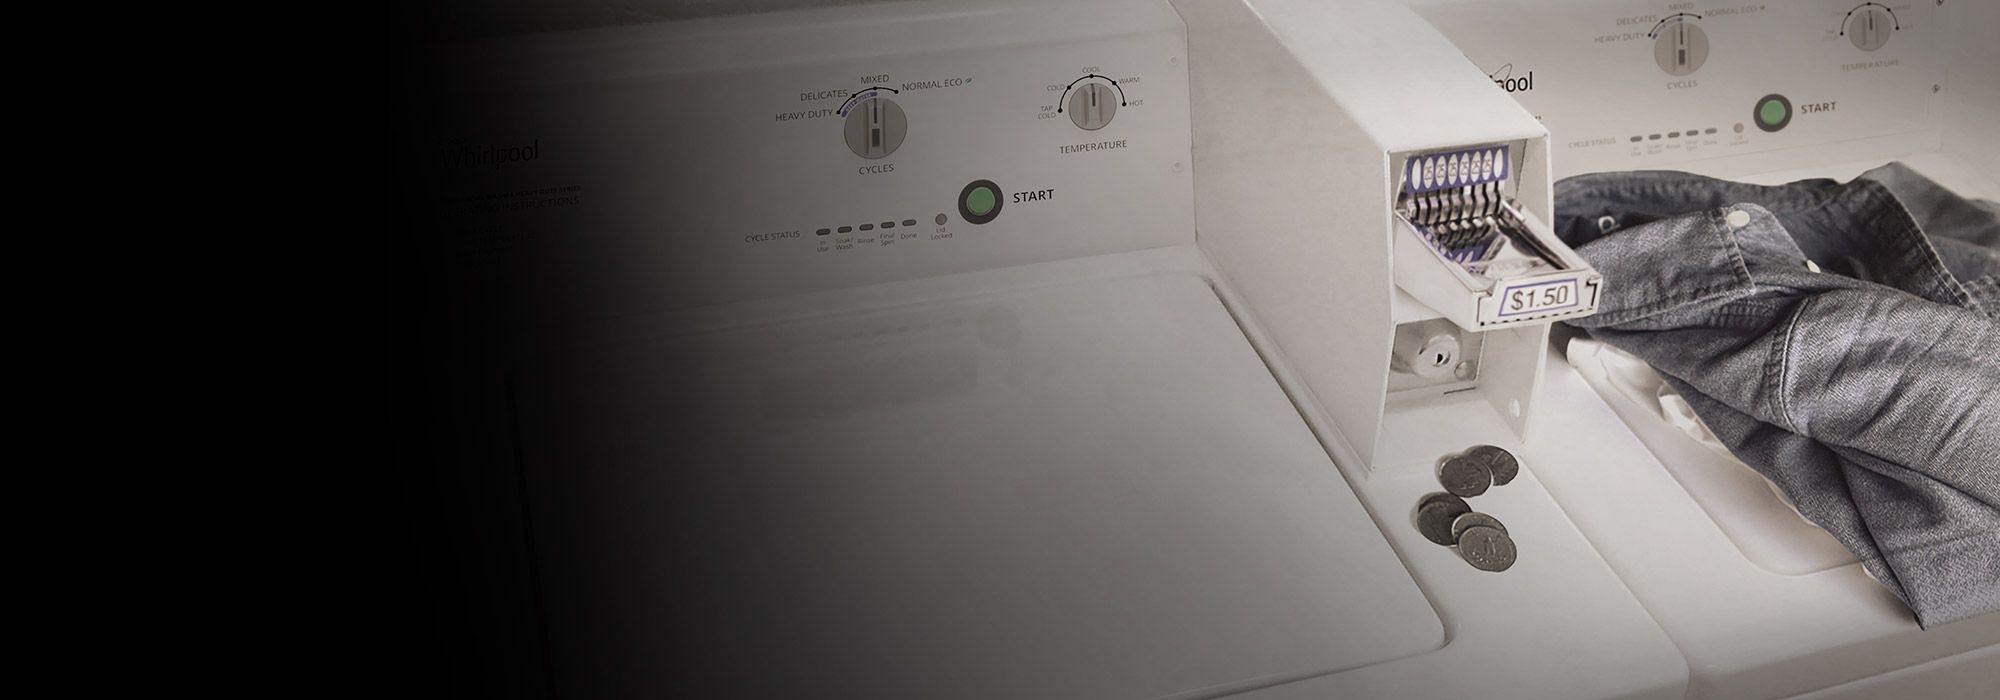 Commercial Washers and Dryers | Whirlpool